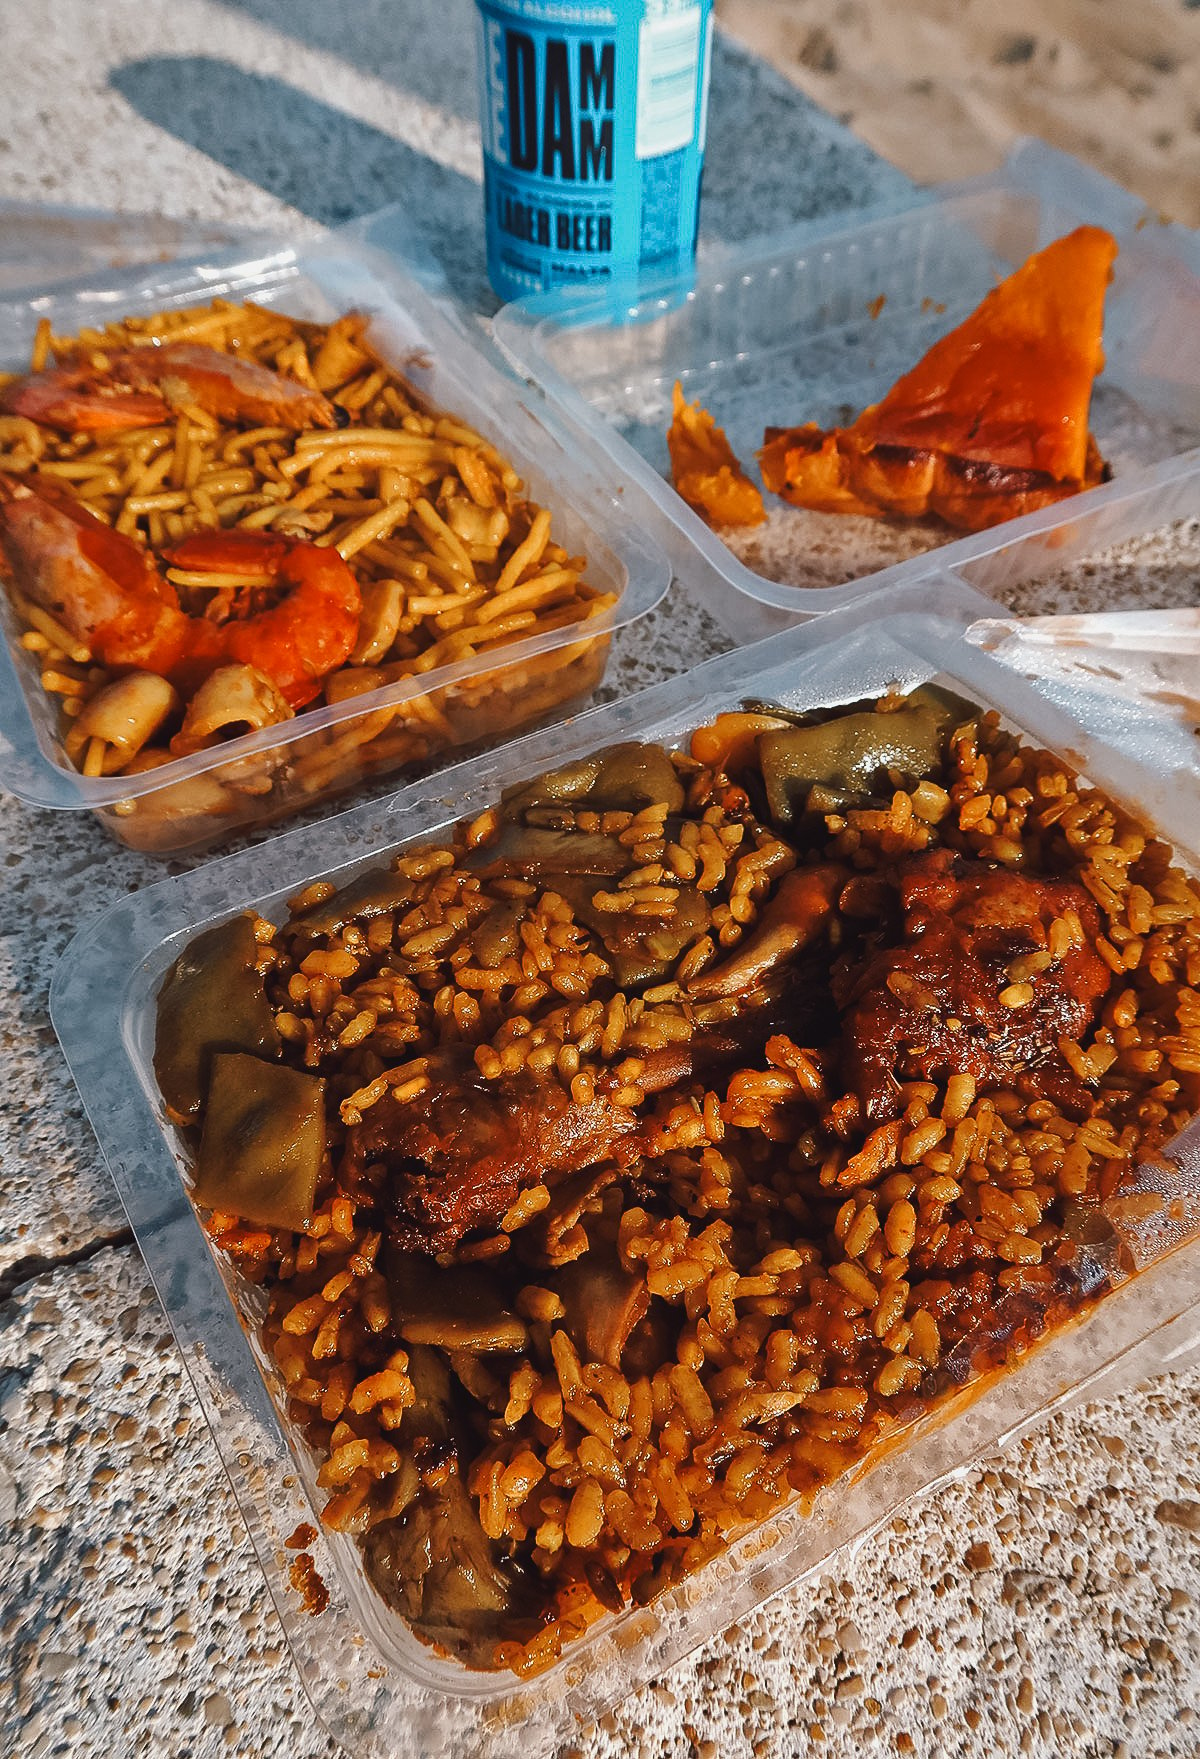 Takeaway paella from a shop in Valencia